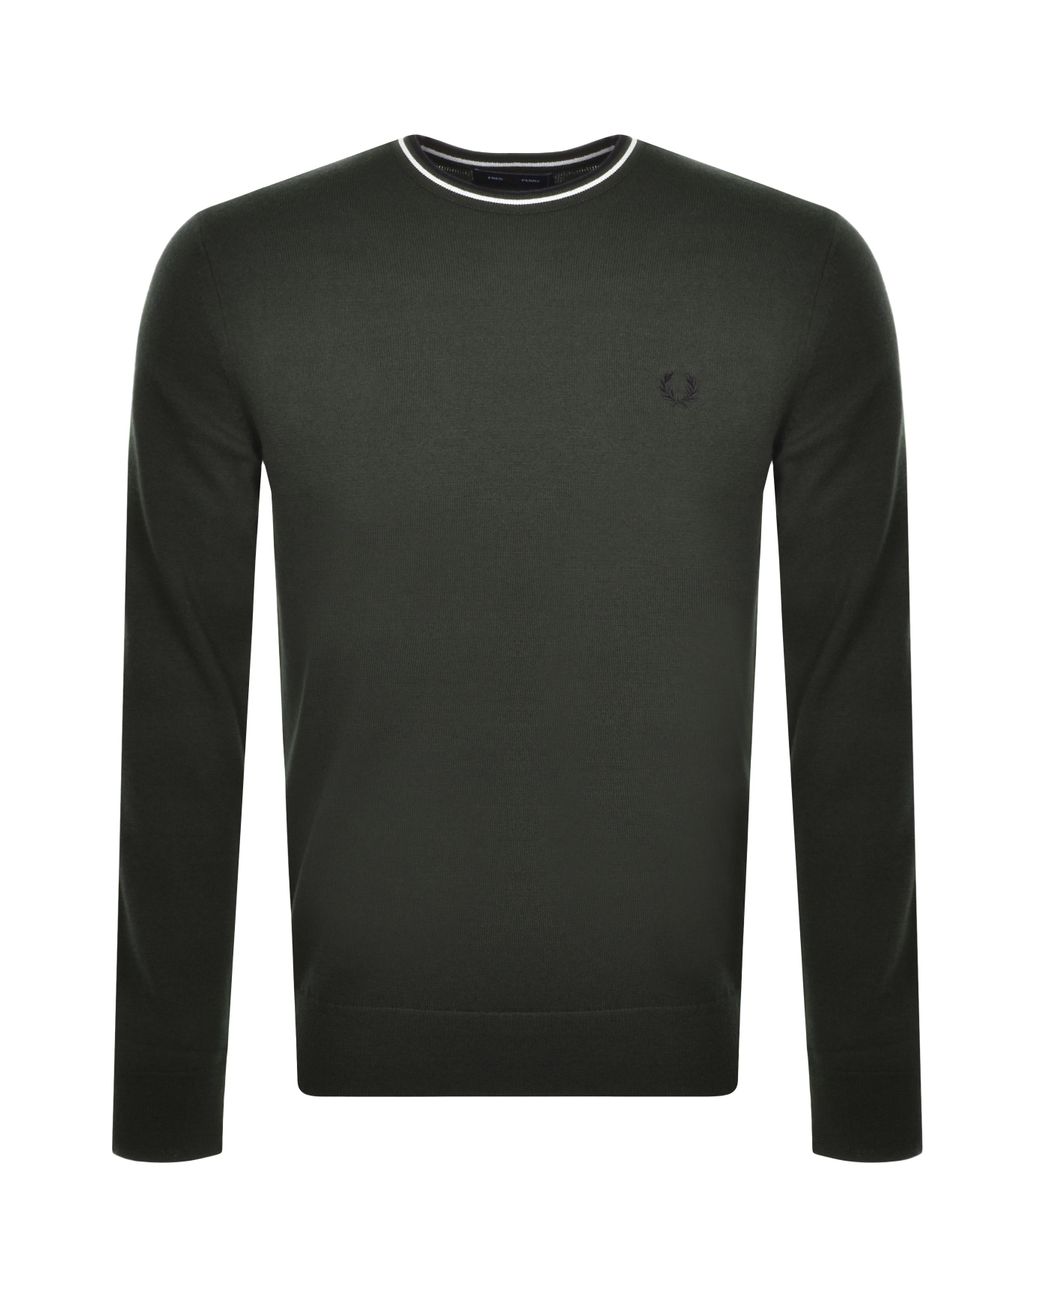 Fred Perry Wool Crew Neck Knit Jumper in Green for Men - Lyst